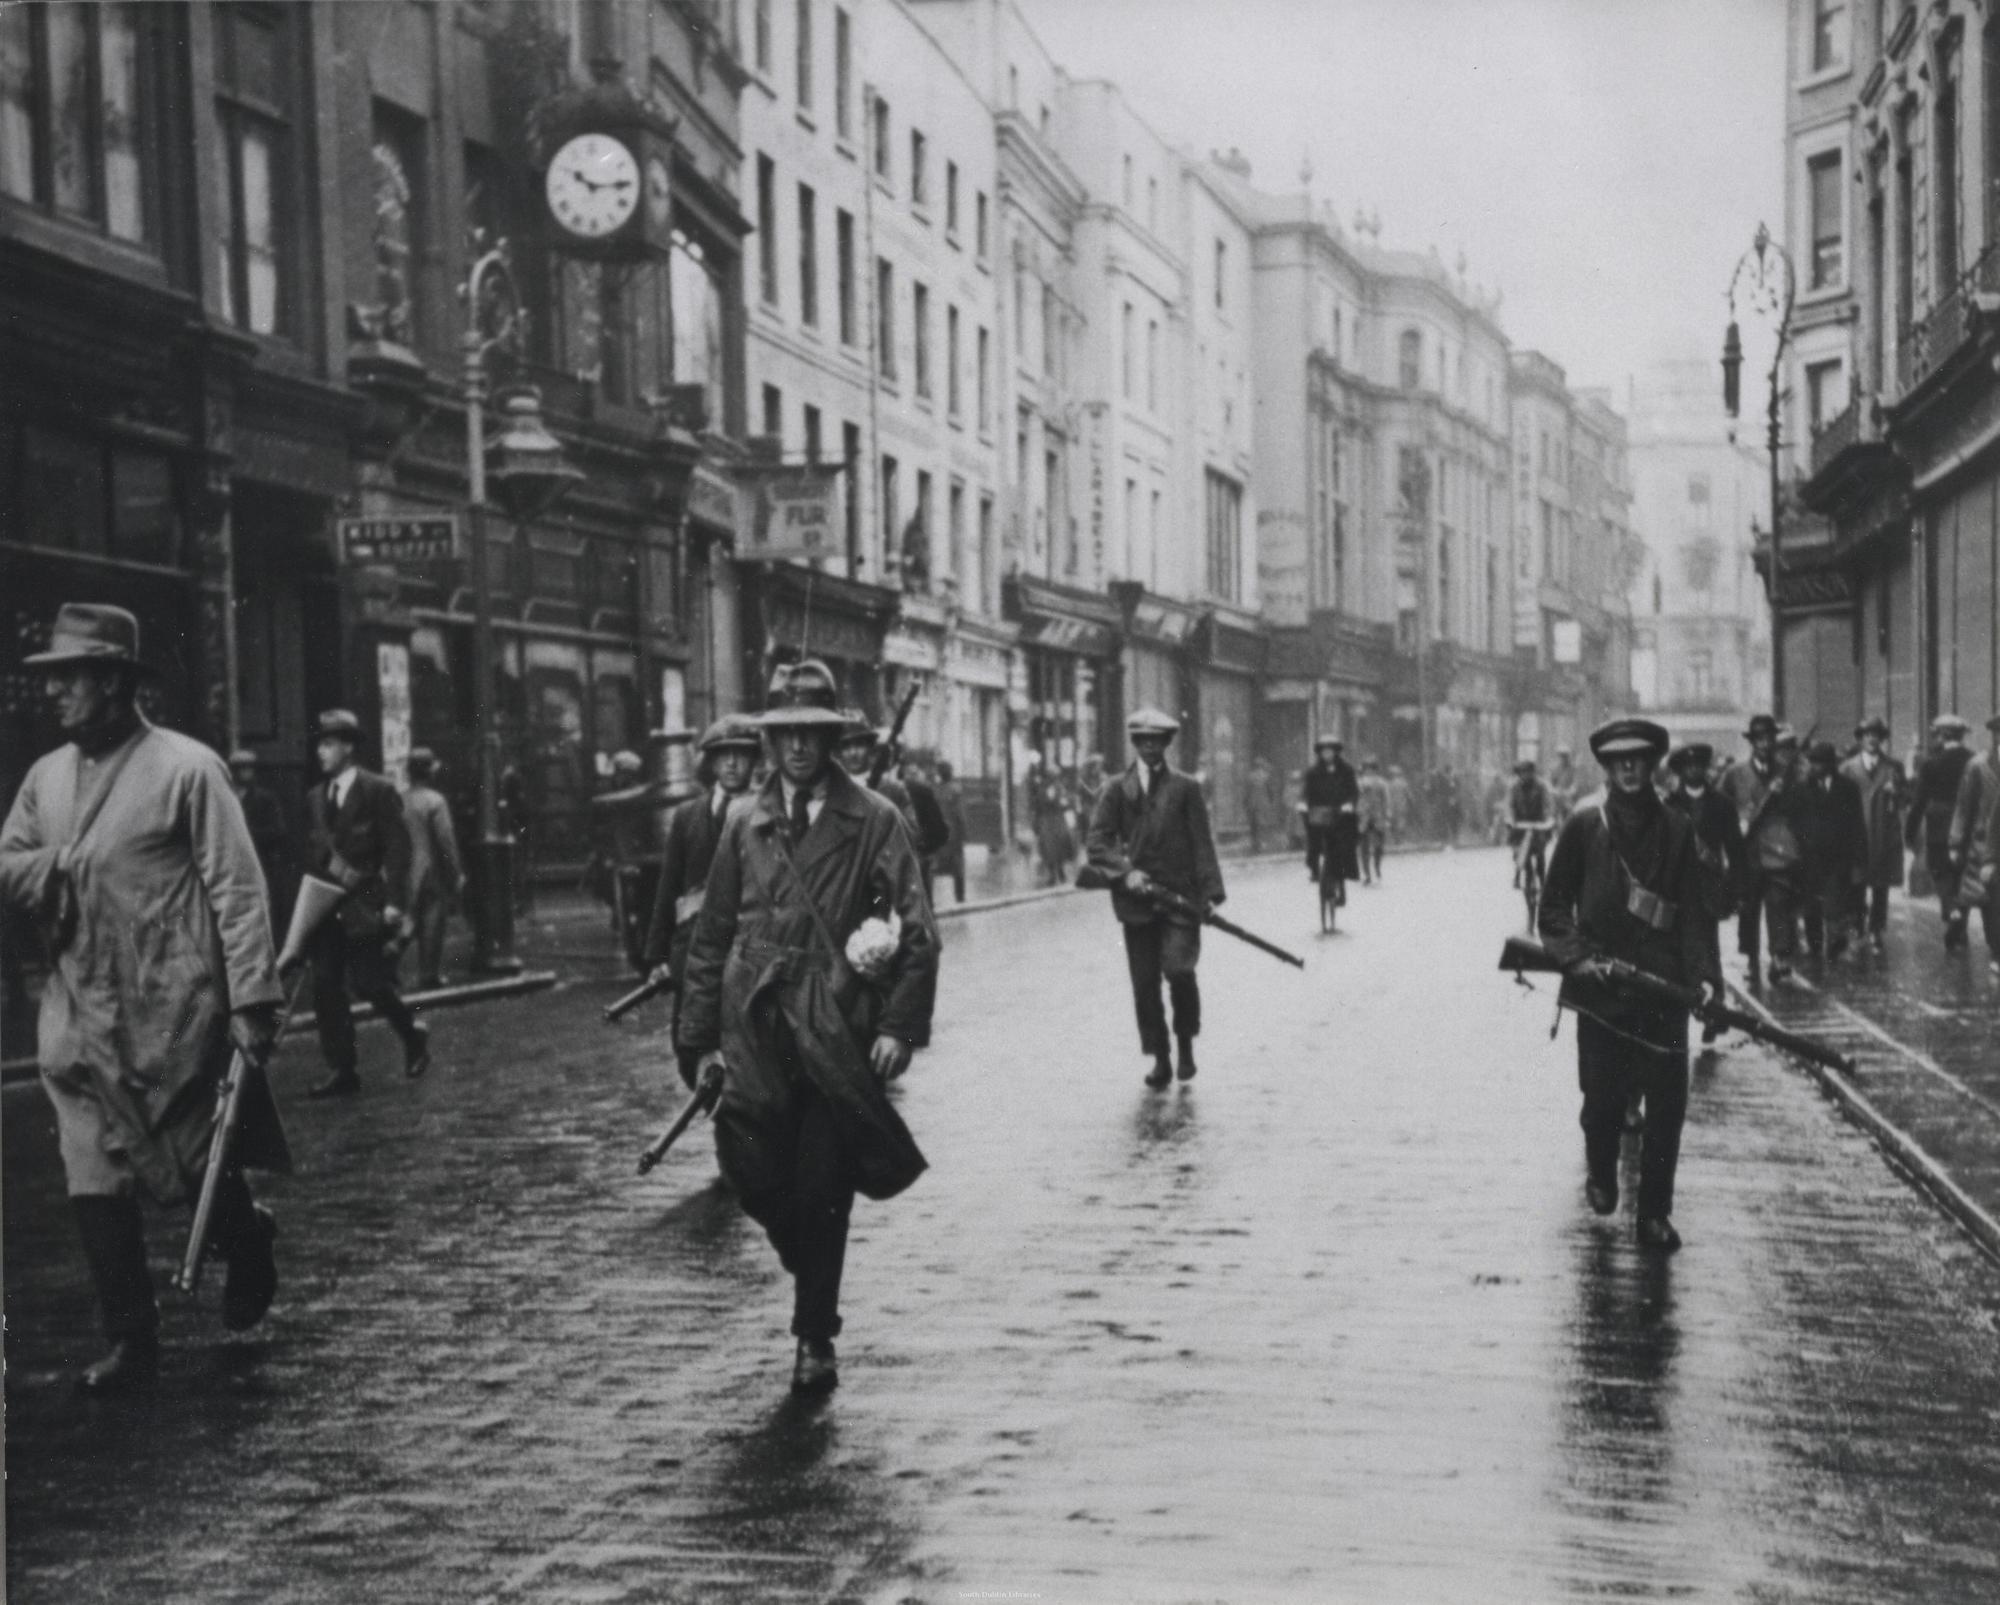 Members of the IRA patrolling the streets of Dublin, Ireland.